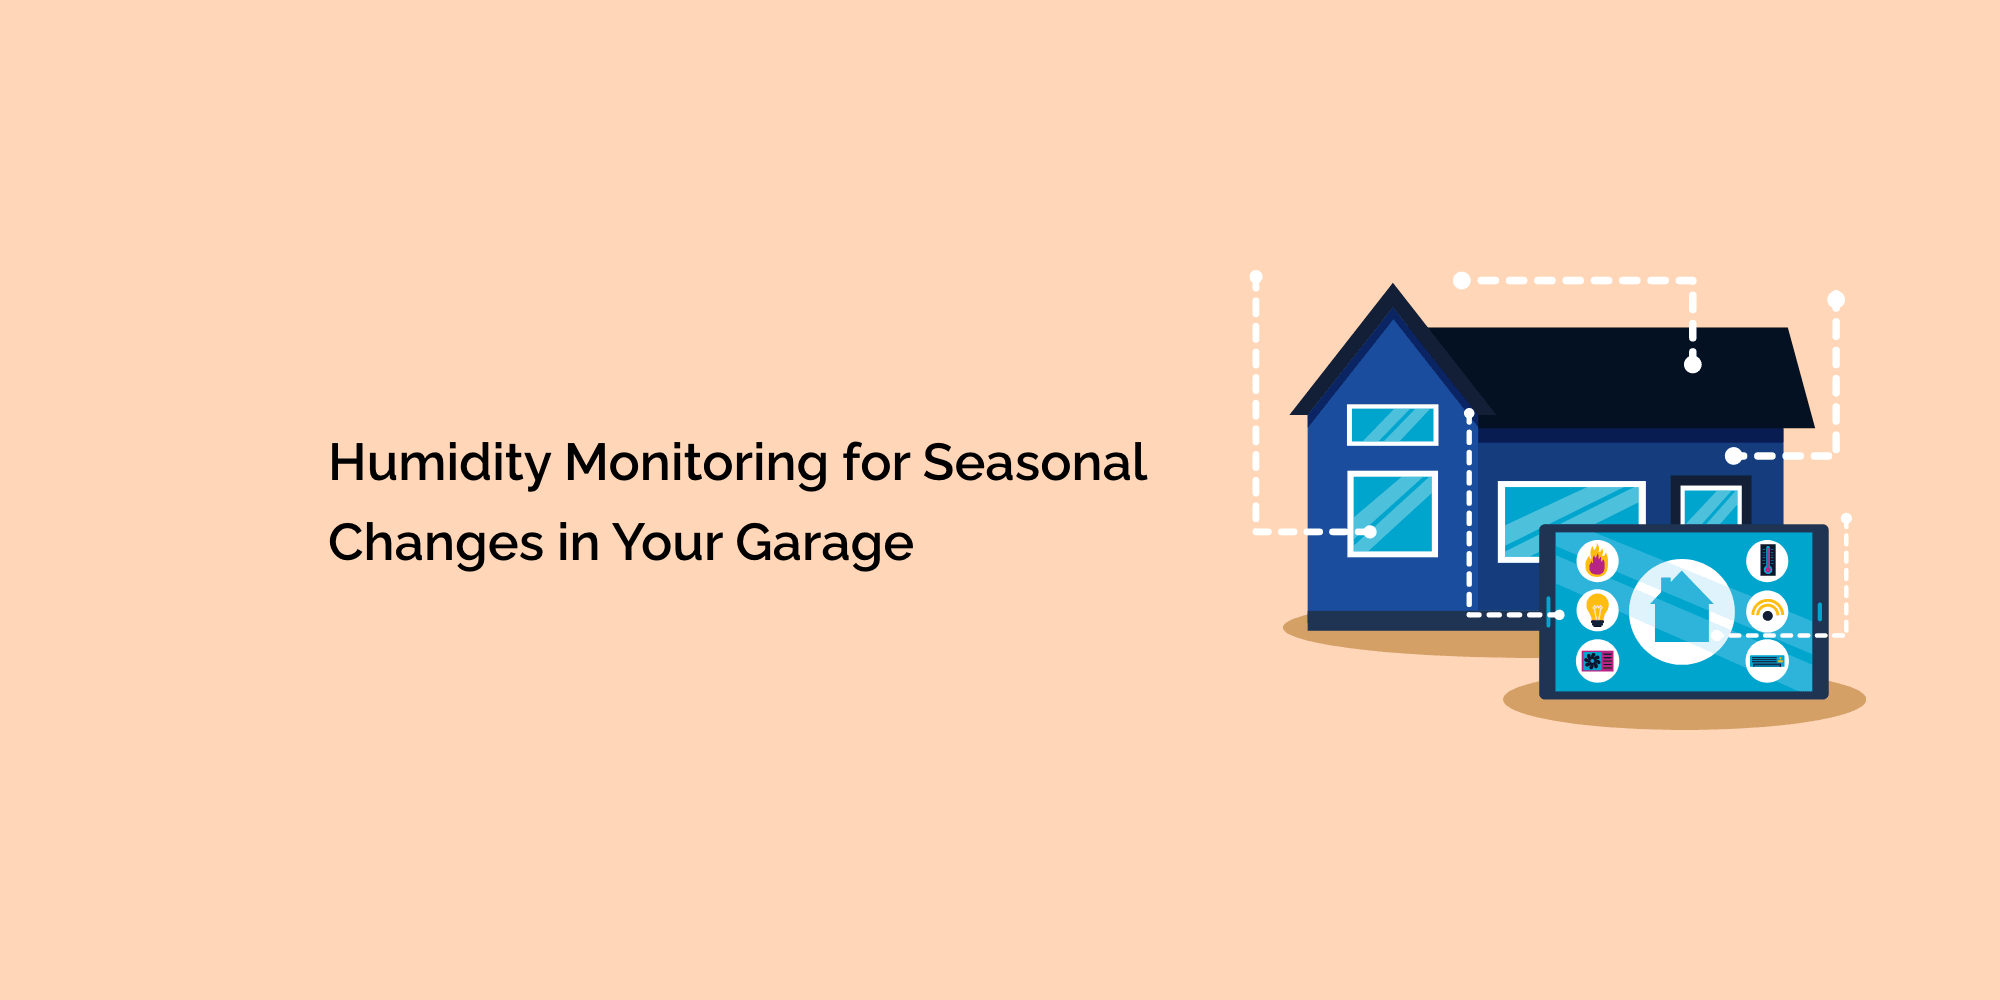 Humidity Monitoring for Seasonal Changes in Your Garage